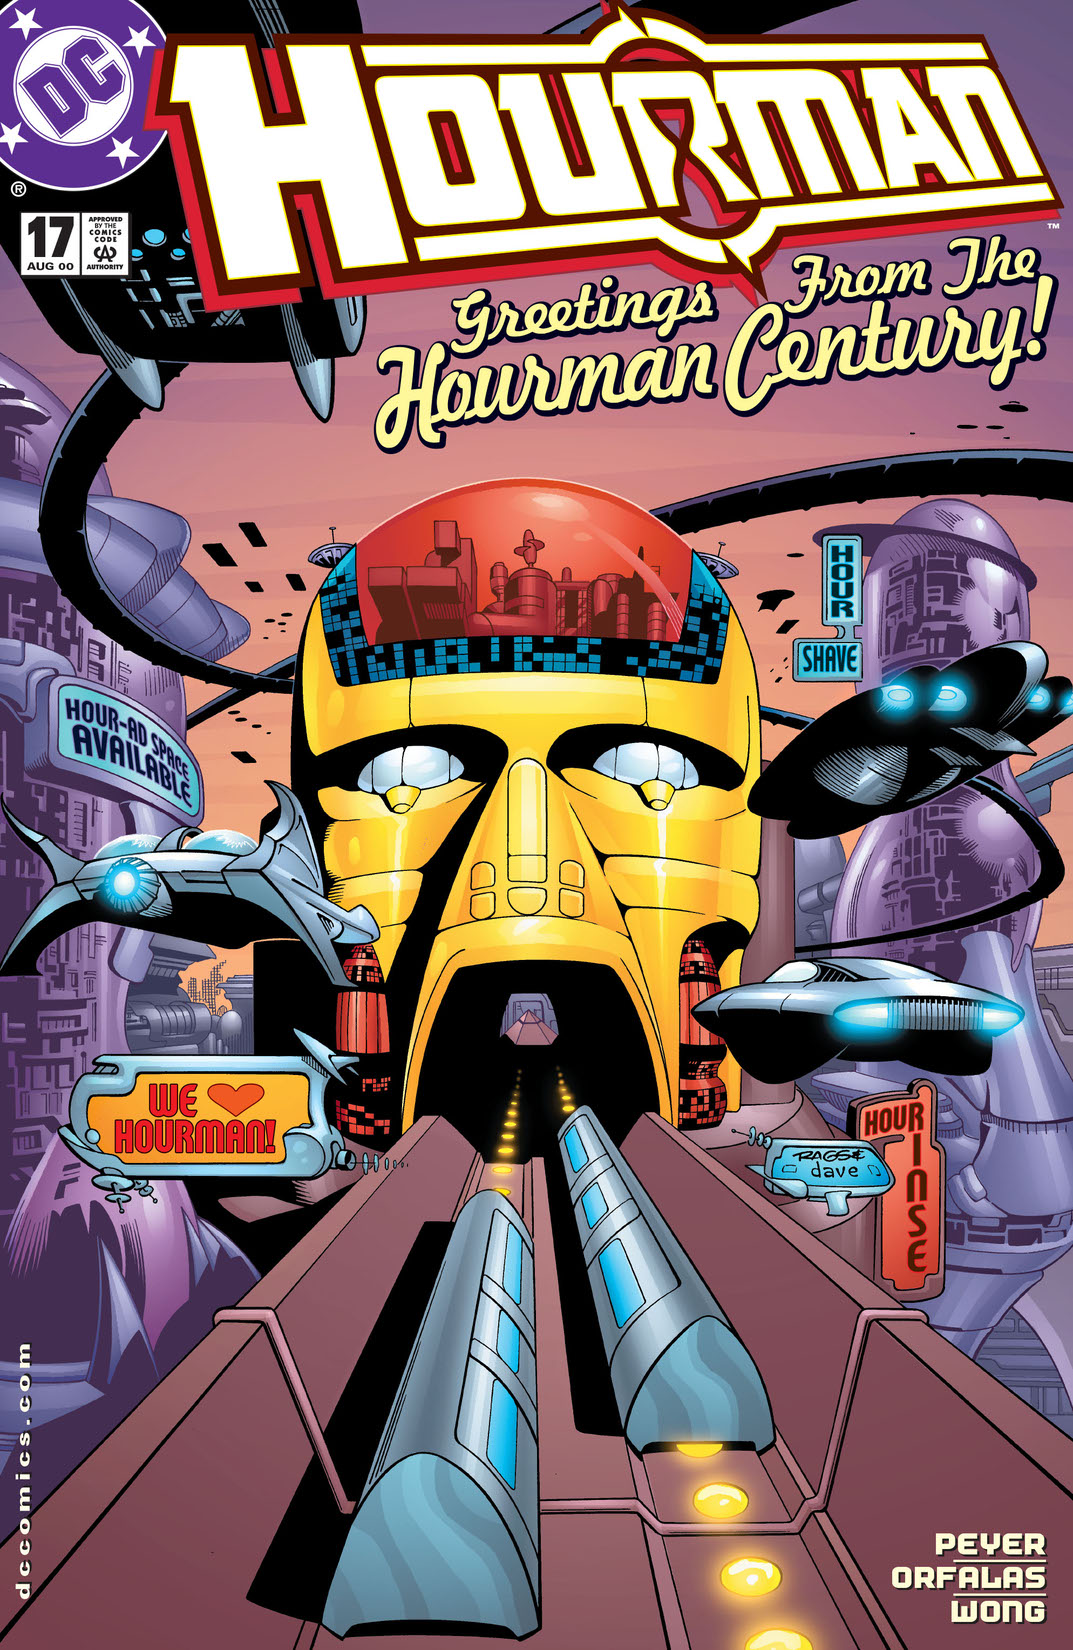 Hourman #17 preview images